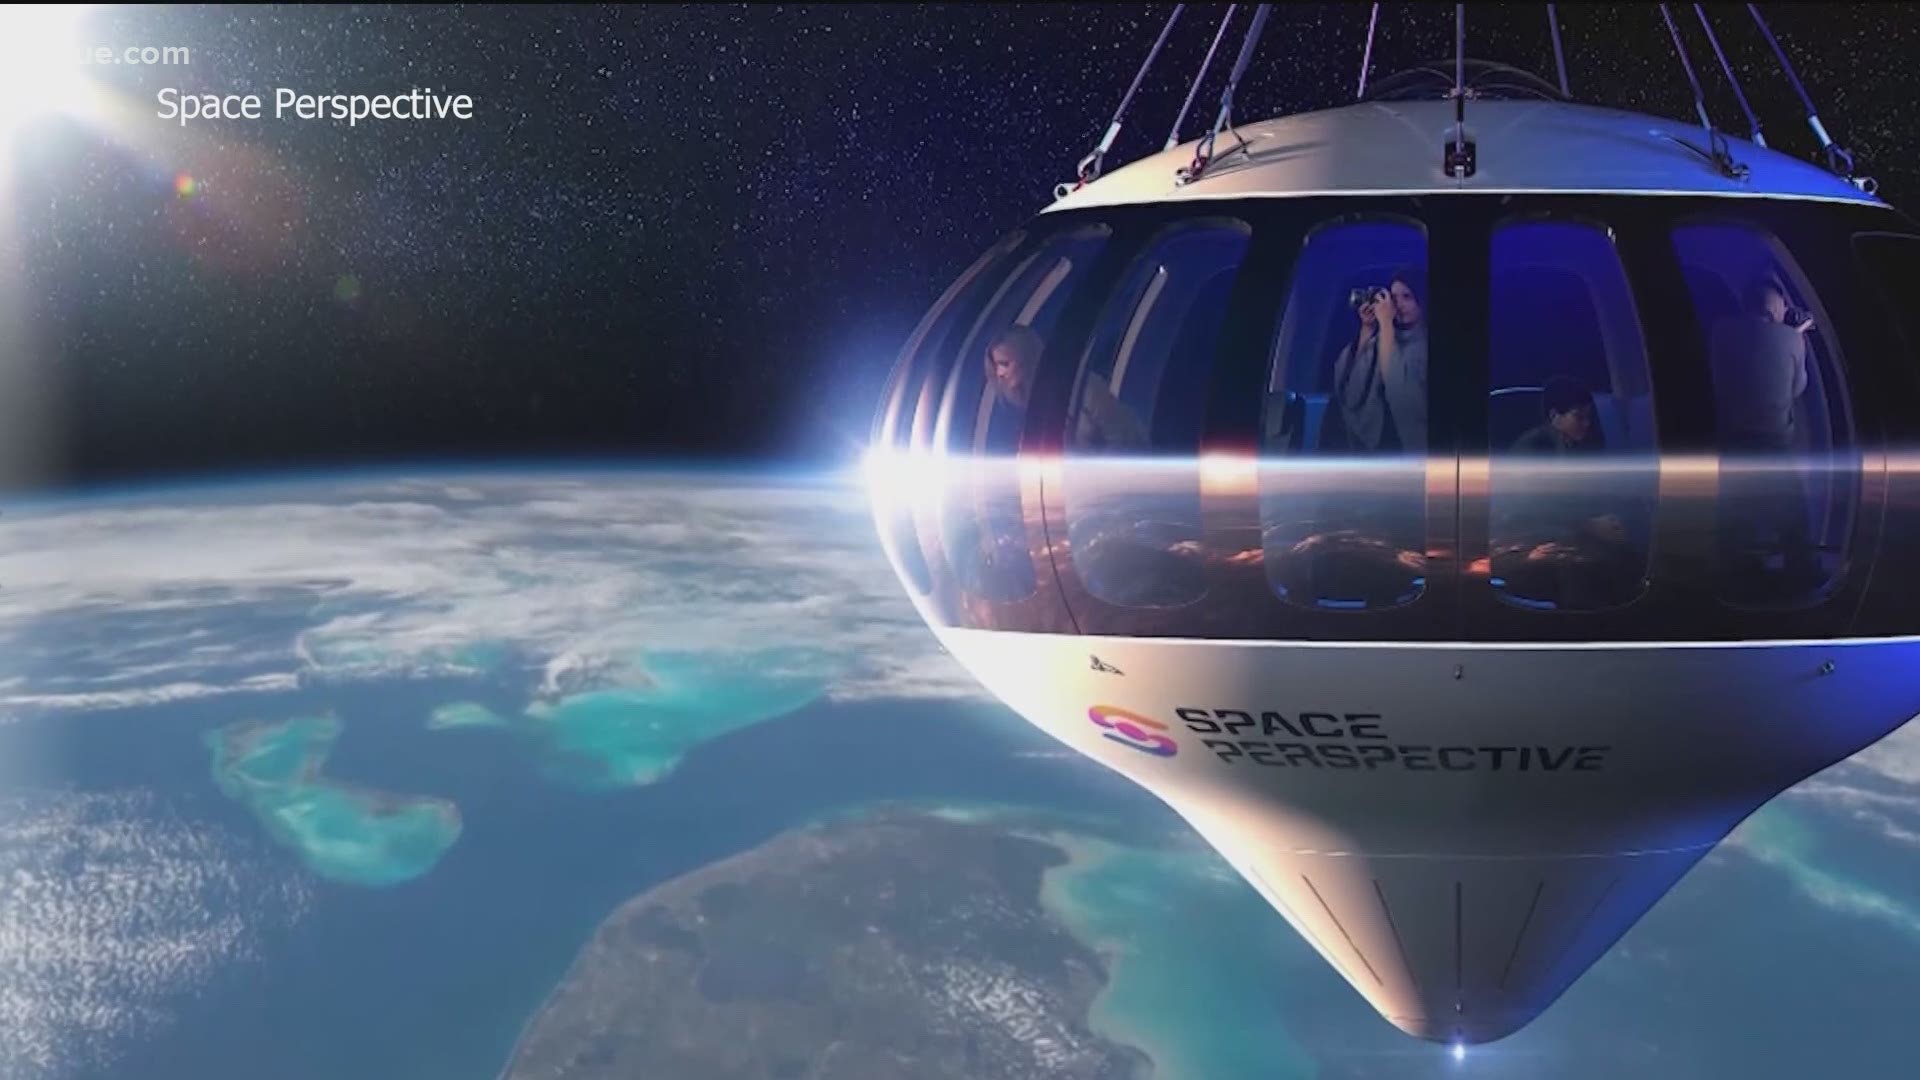 The luxury spaceflight company, Space Perspective, will start sending people up into space in 2024 on “Spaceship Neptune.”